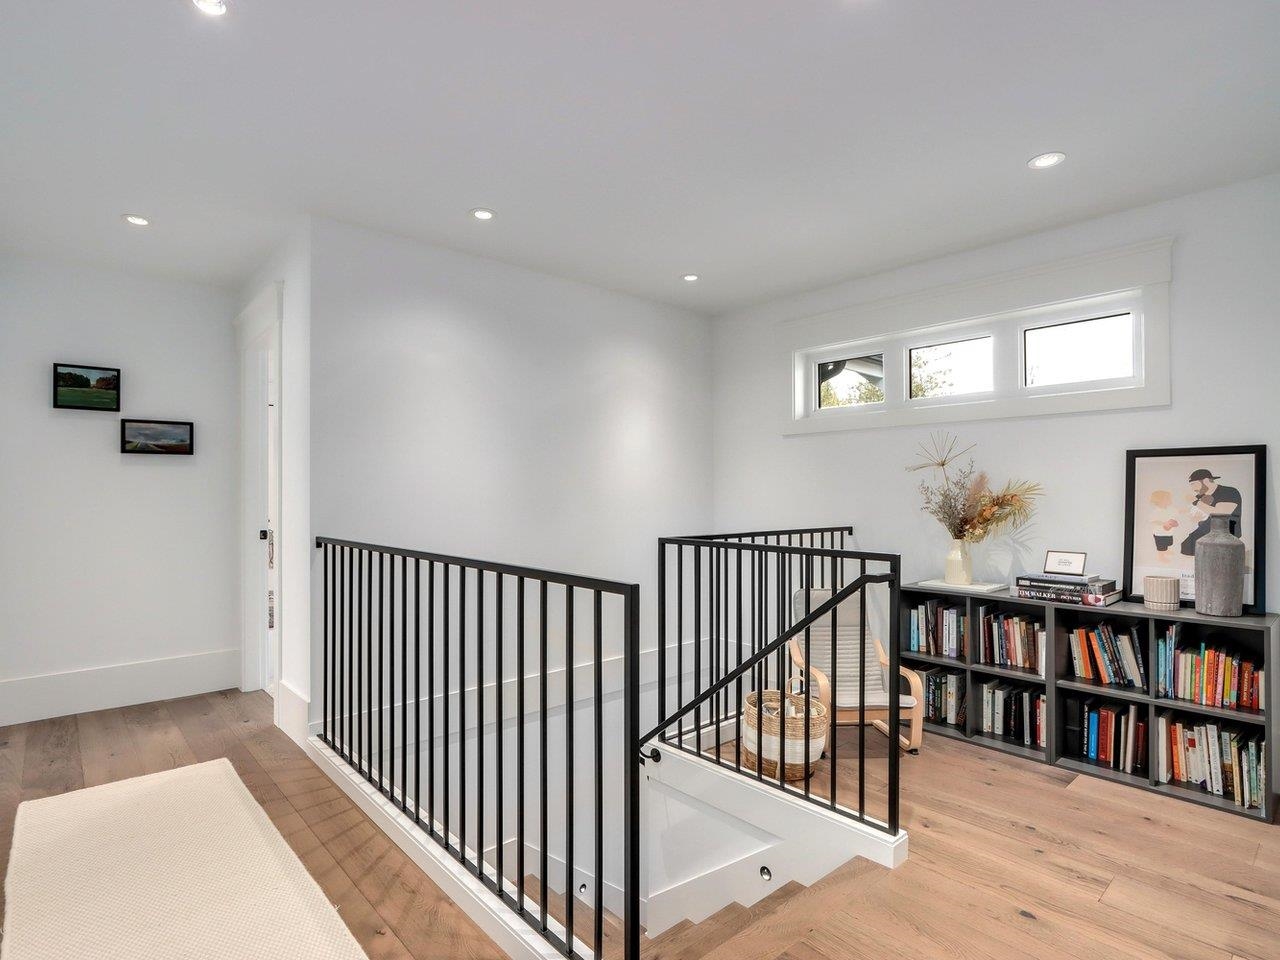 Listing image of 1381 W 22ND STREET